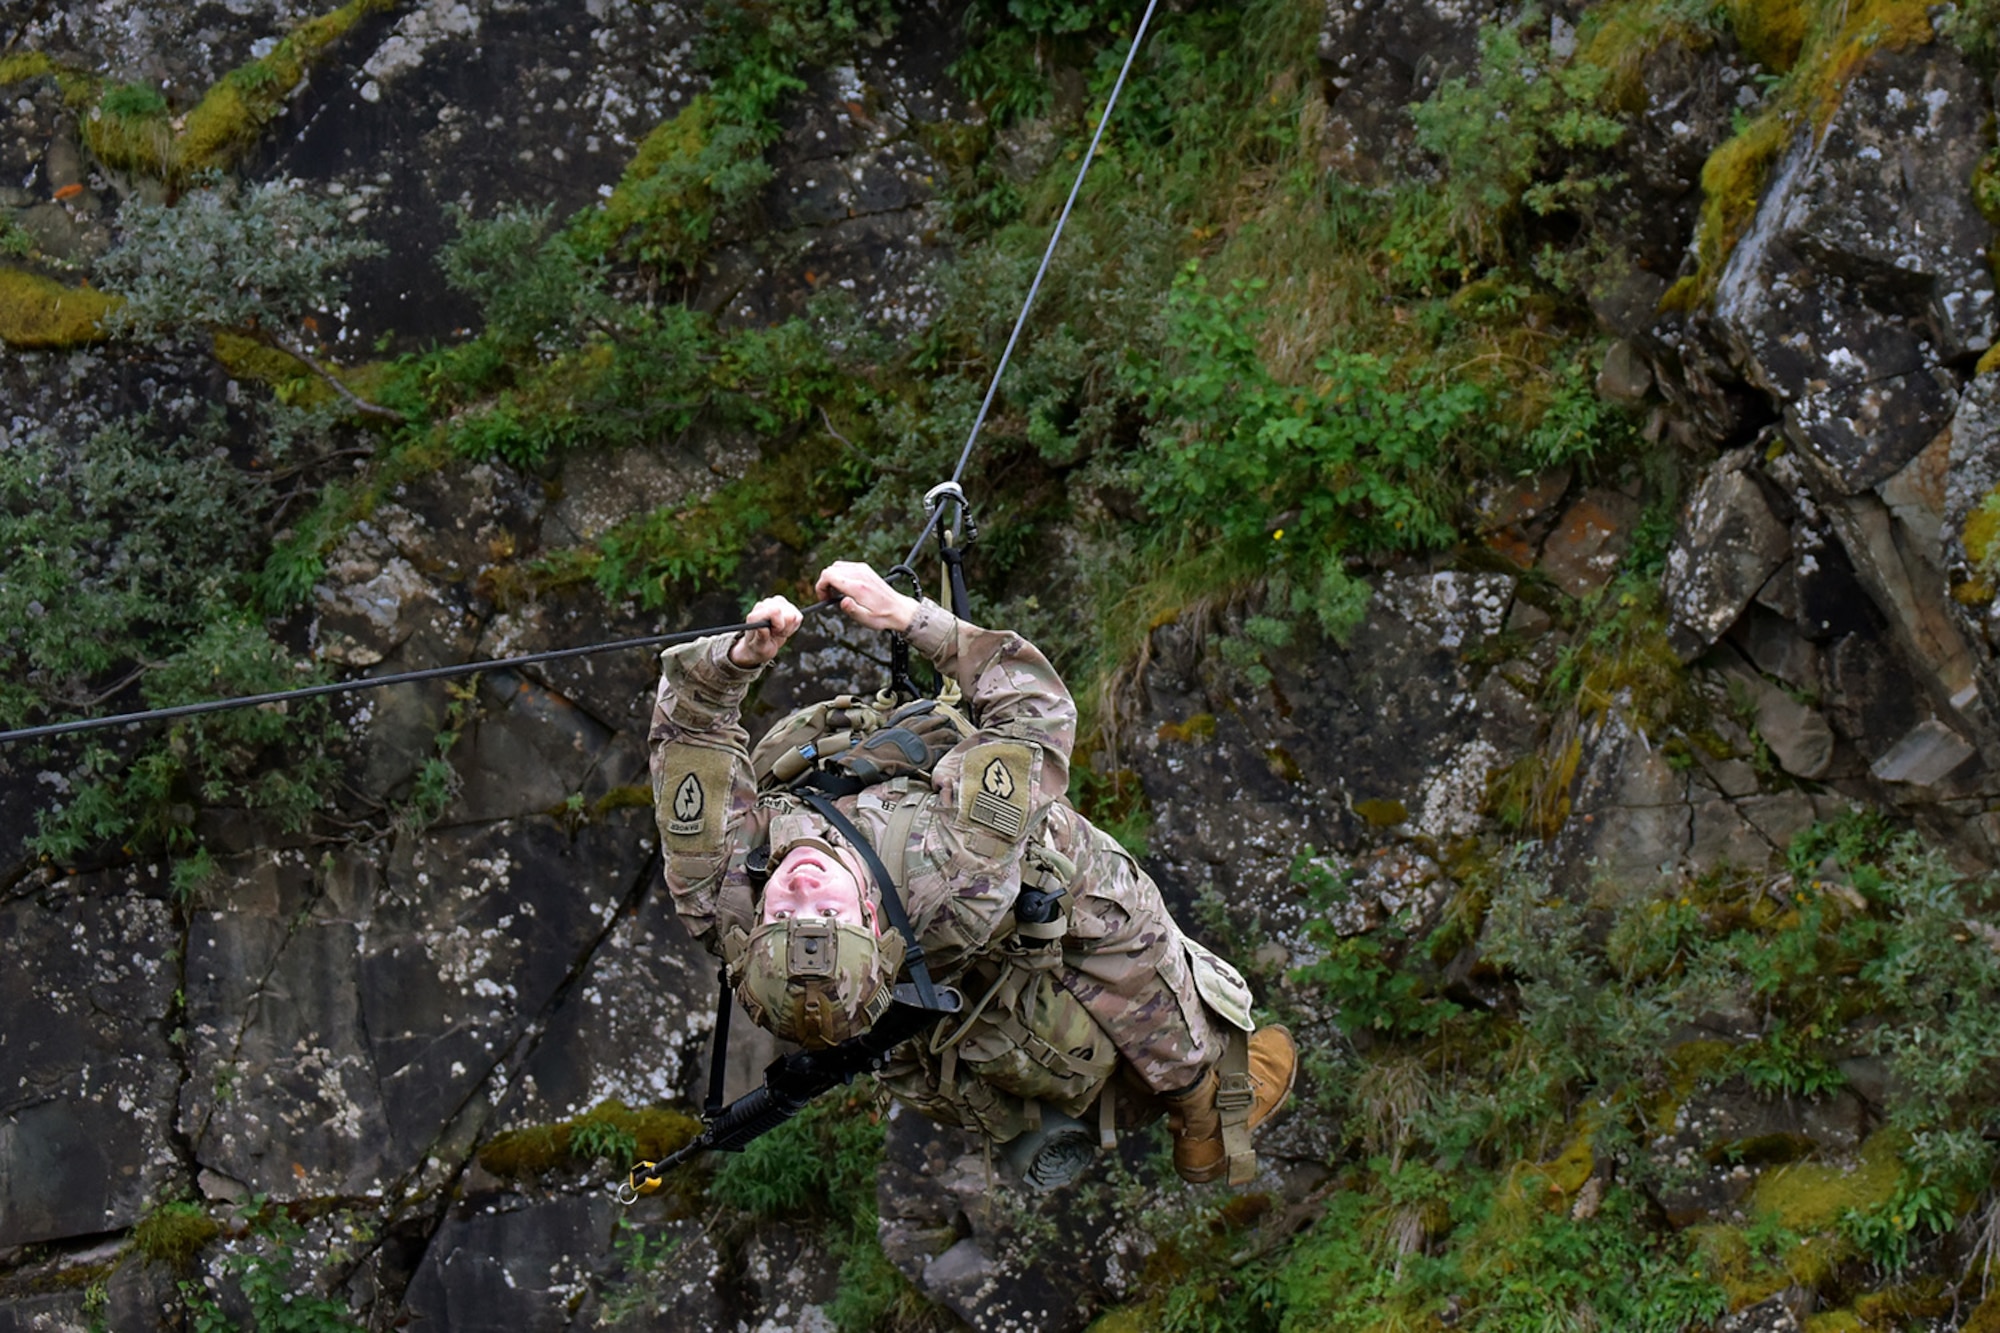 Basic Military Mountaineering Course student 1st Lt. Christopher Peer crosses a one-rope bridge over a mountain gorge at the Northern Warfare Training Center’s Black Rapids Site during training. NWTC cadre followed Coronavirus restrictions while guiding students through both the basic and advanced mountaineering courses in August. With the advent of Alaska’s long, cold winter, NWTC’s focus is now shifting to cold weather training for the 2020-21 season.